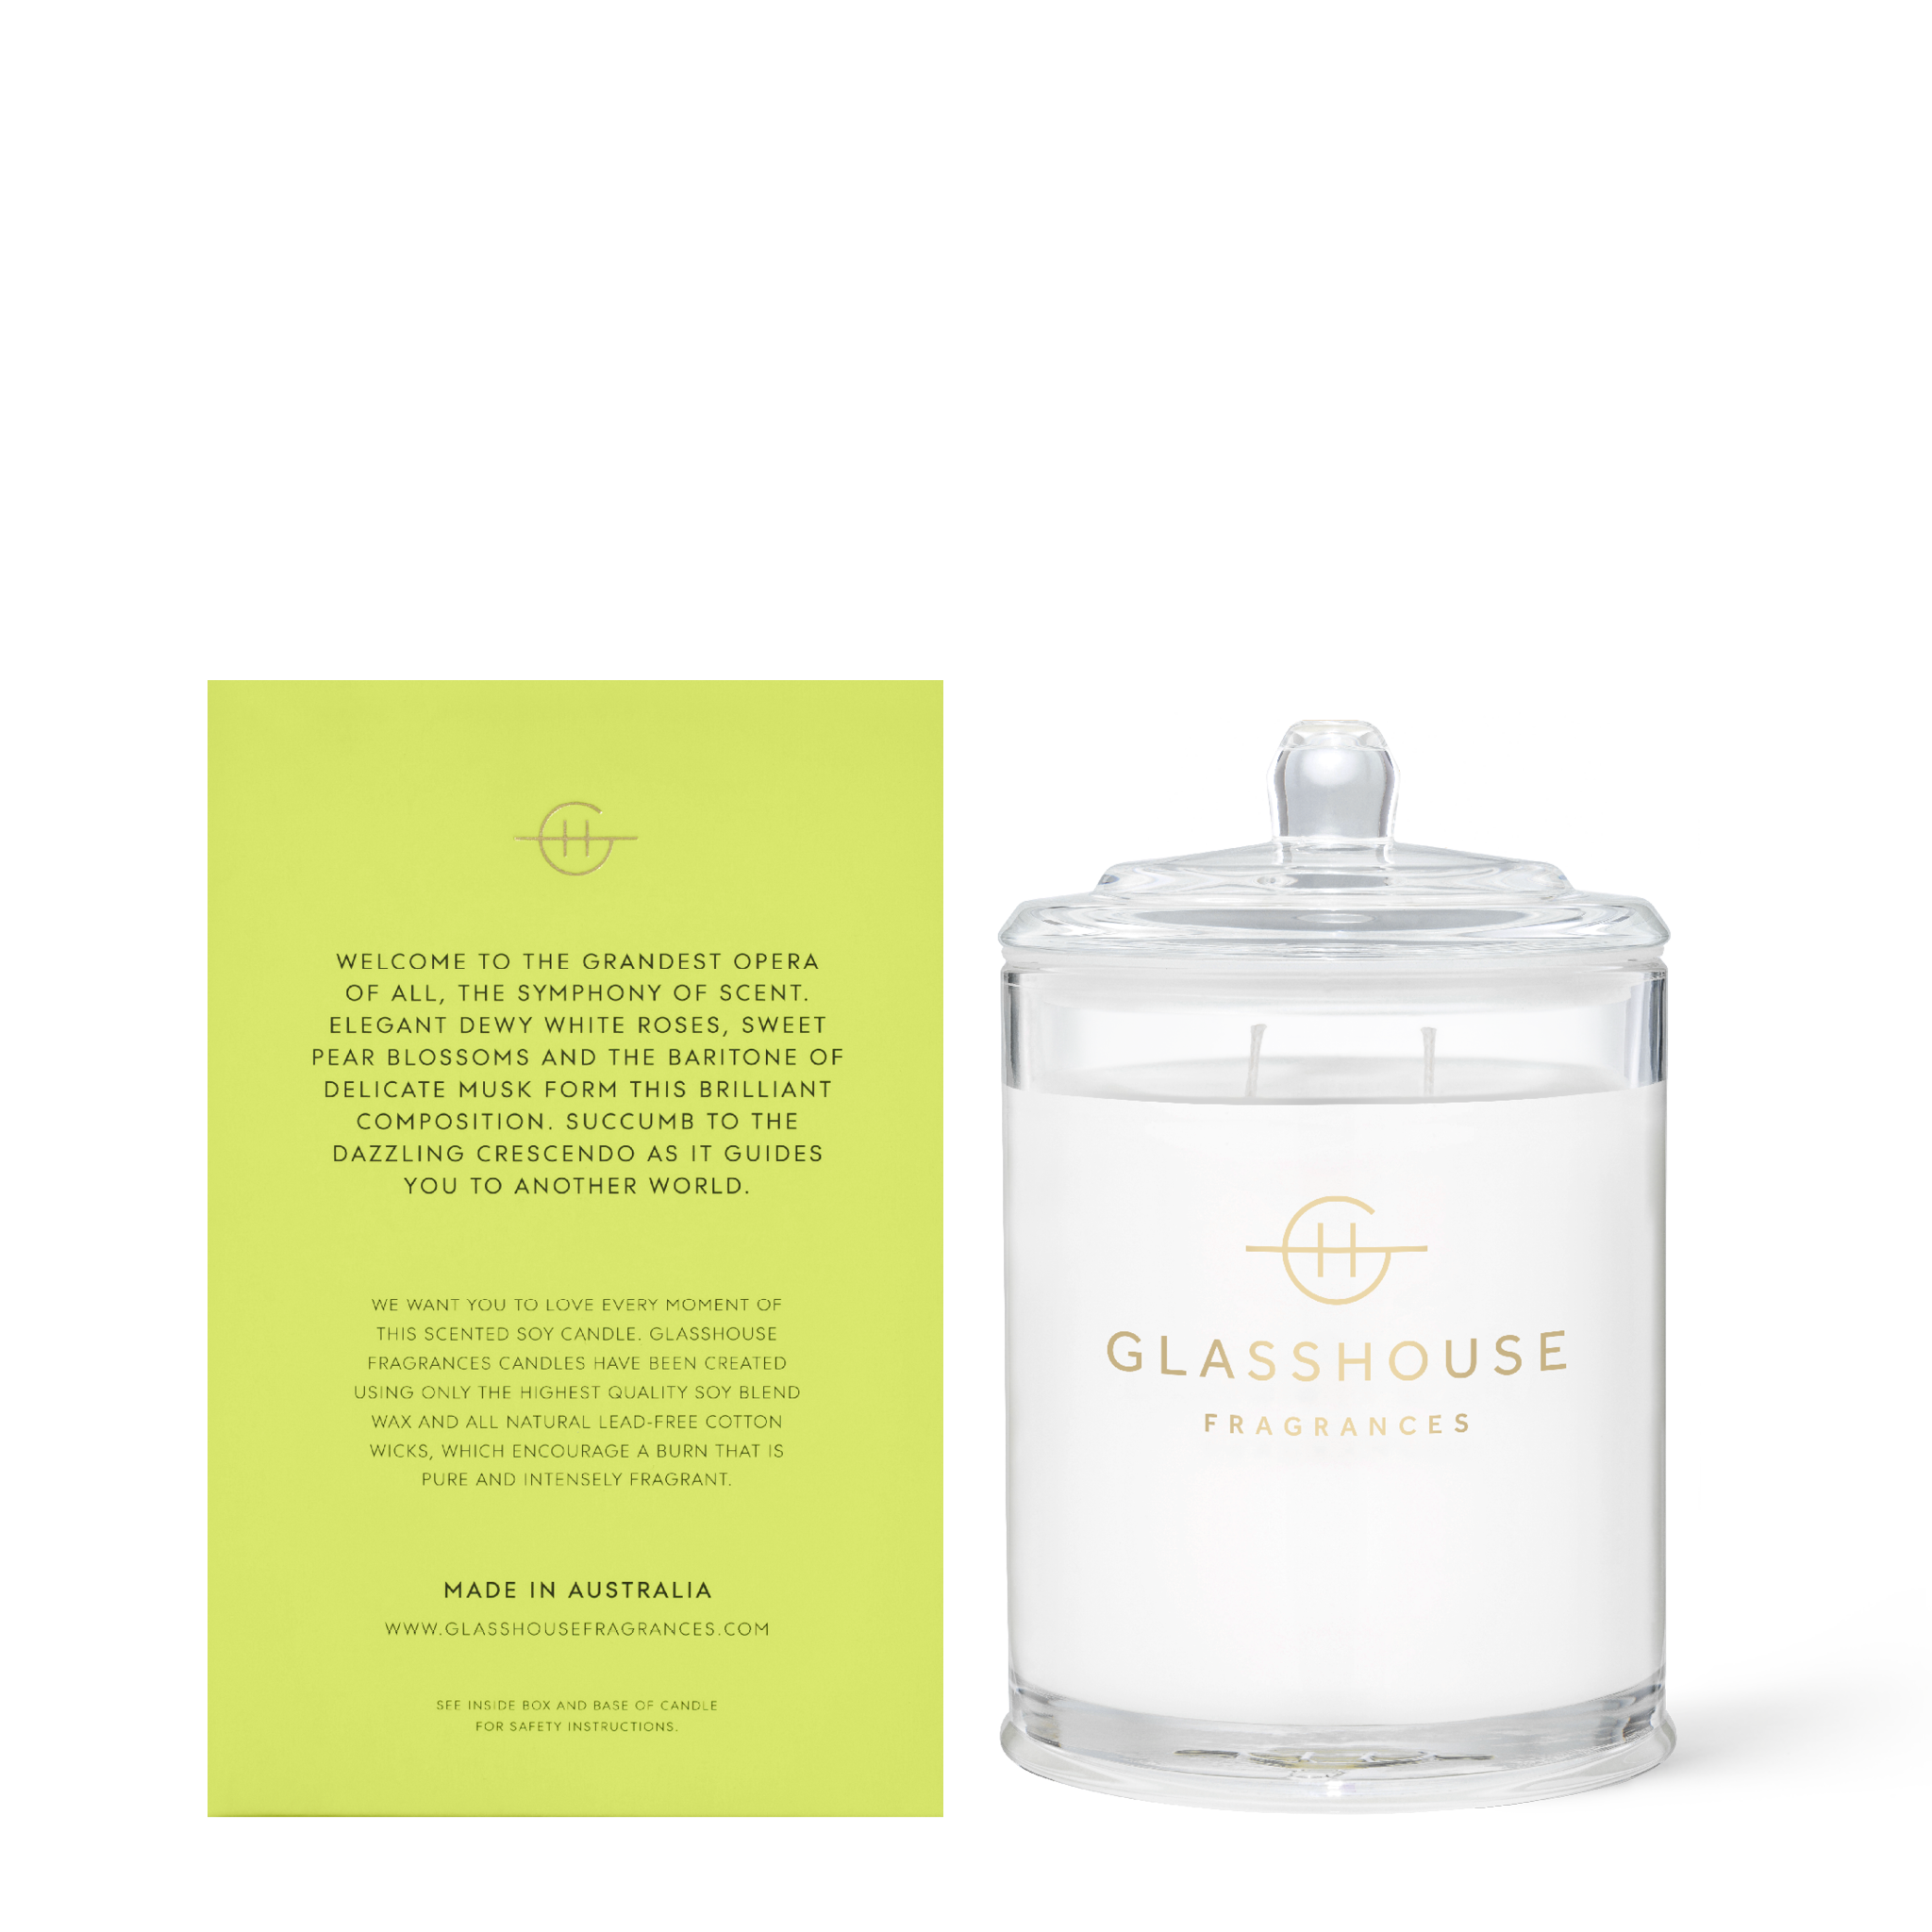 Glasshouse Fragrances Flower Symphony White Rose and Pear Blossom 380g Soy Candle with box - back of product shot